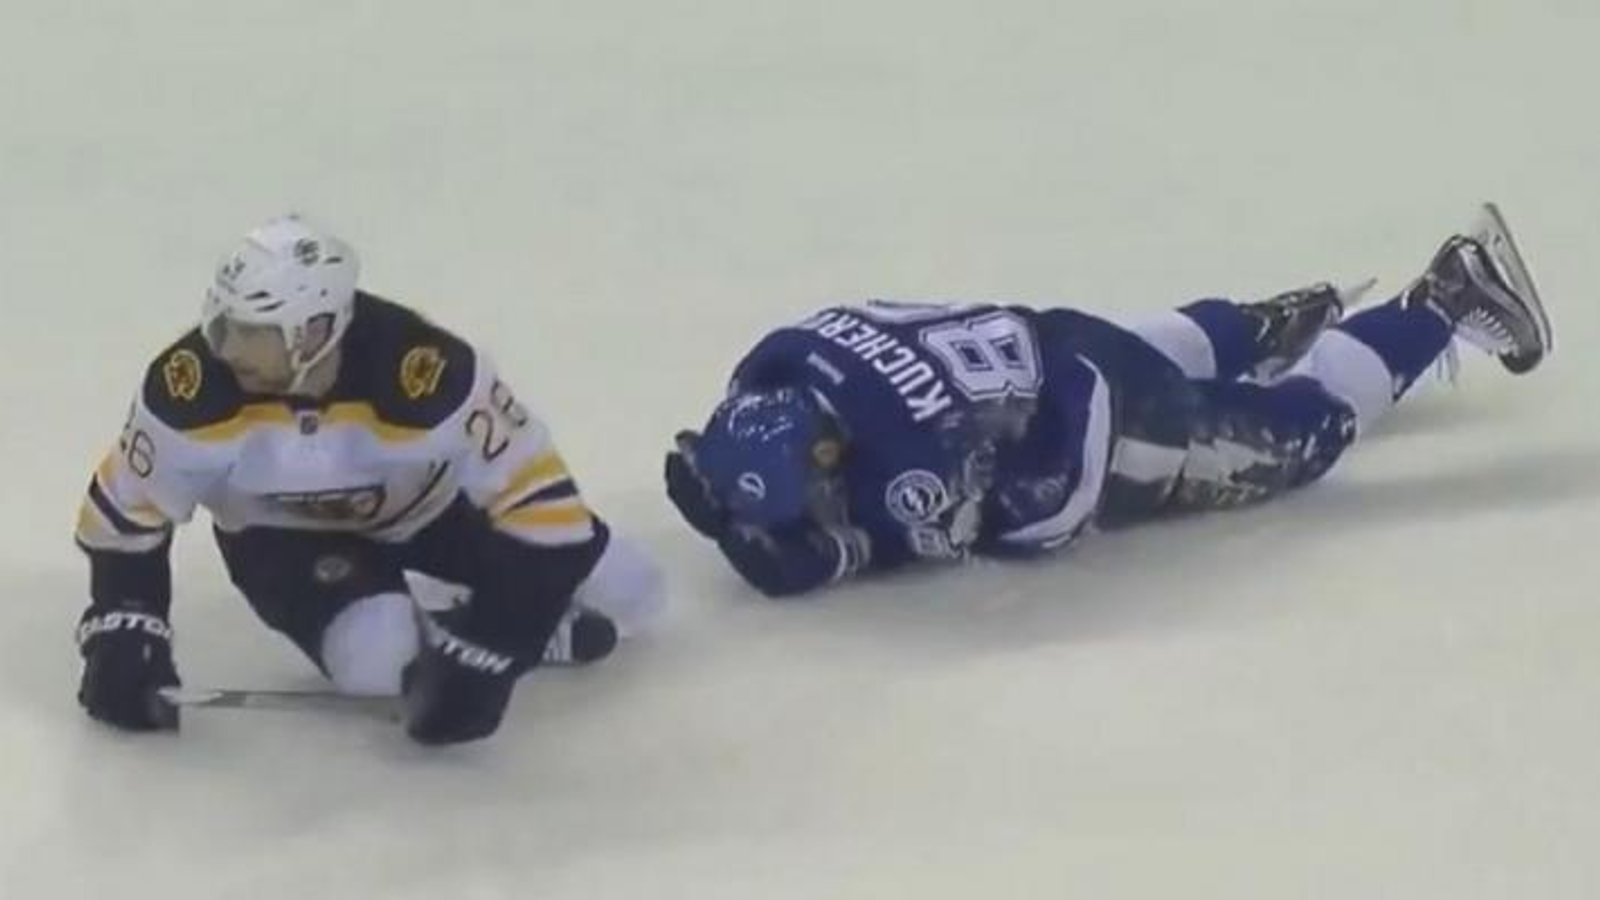 Kucherov gets destroyed by a big forearm to the head.